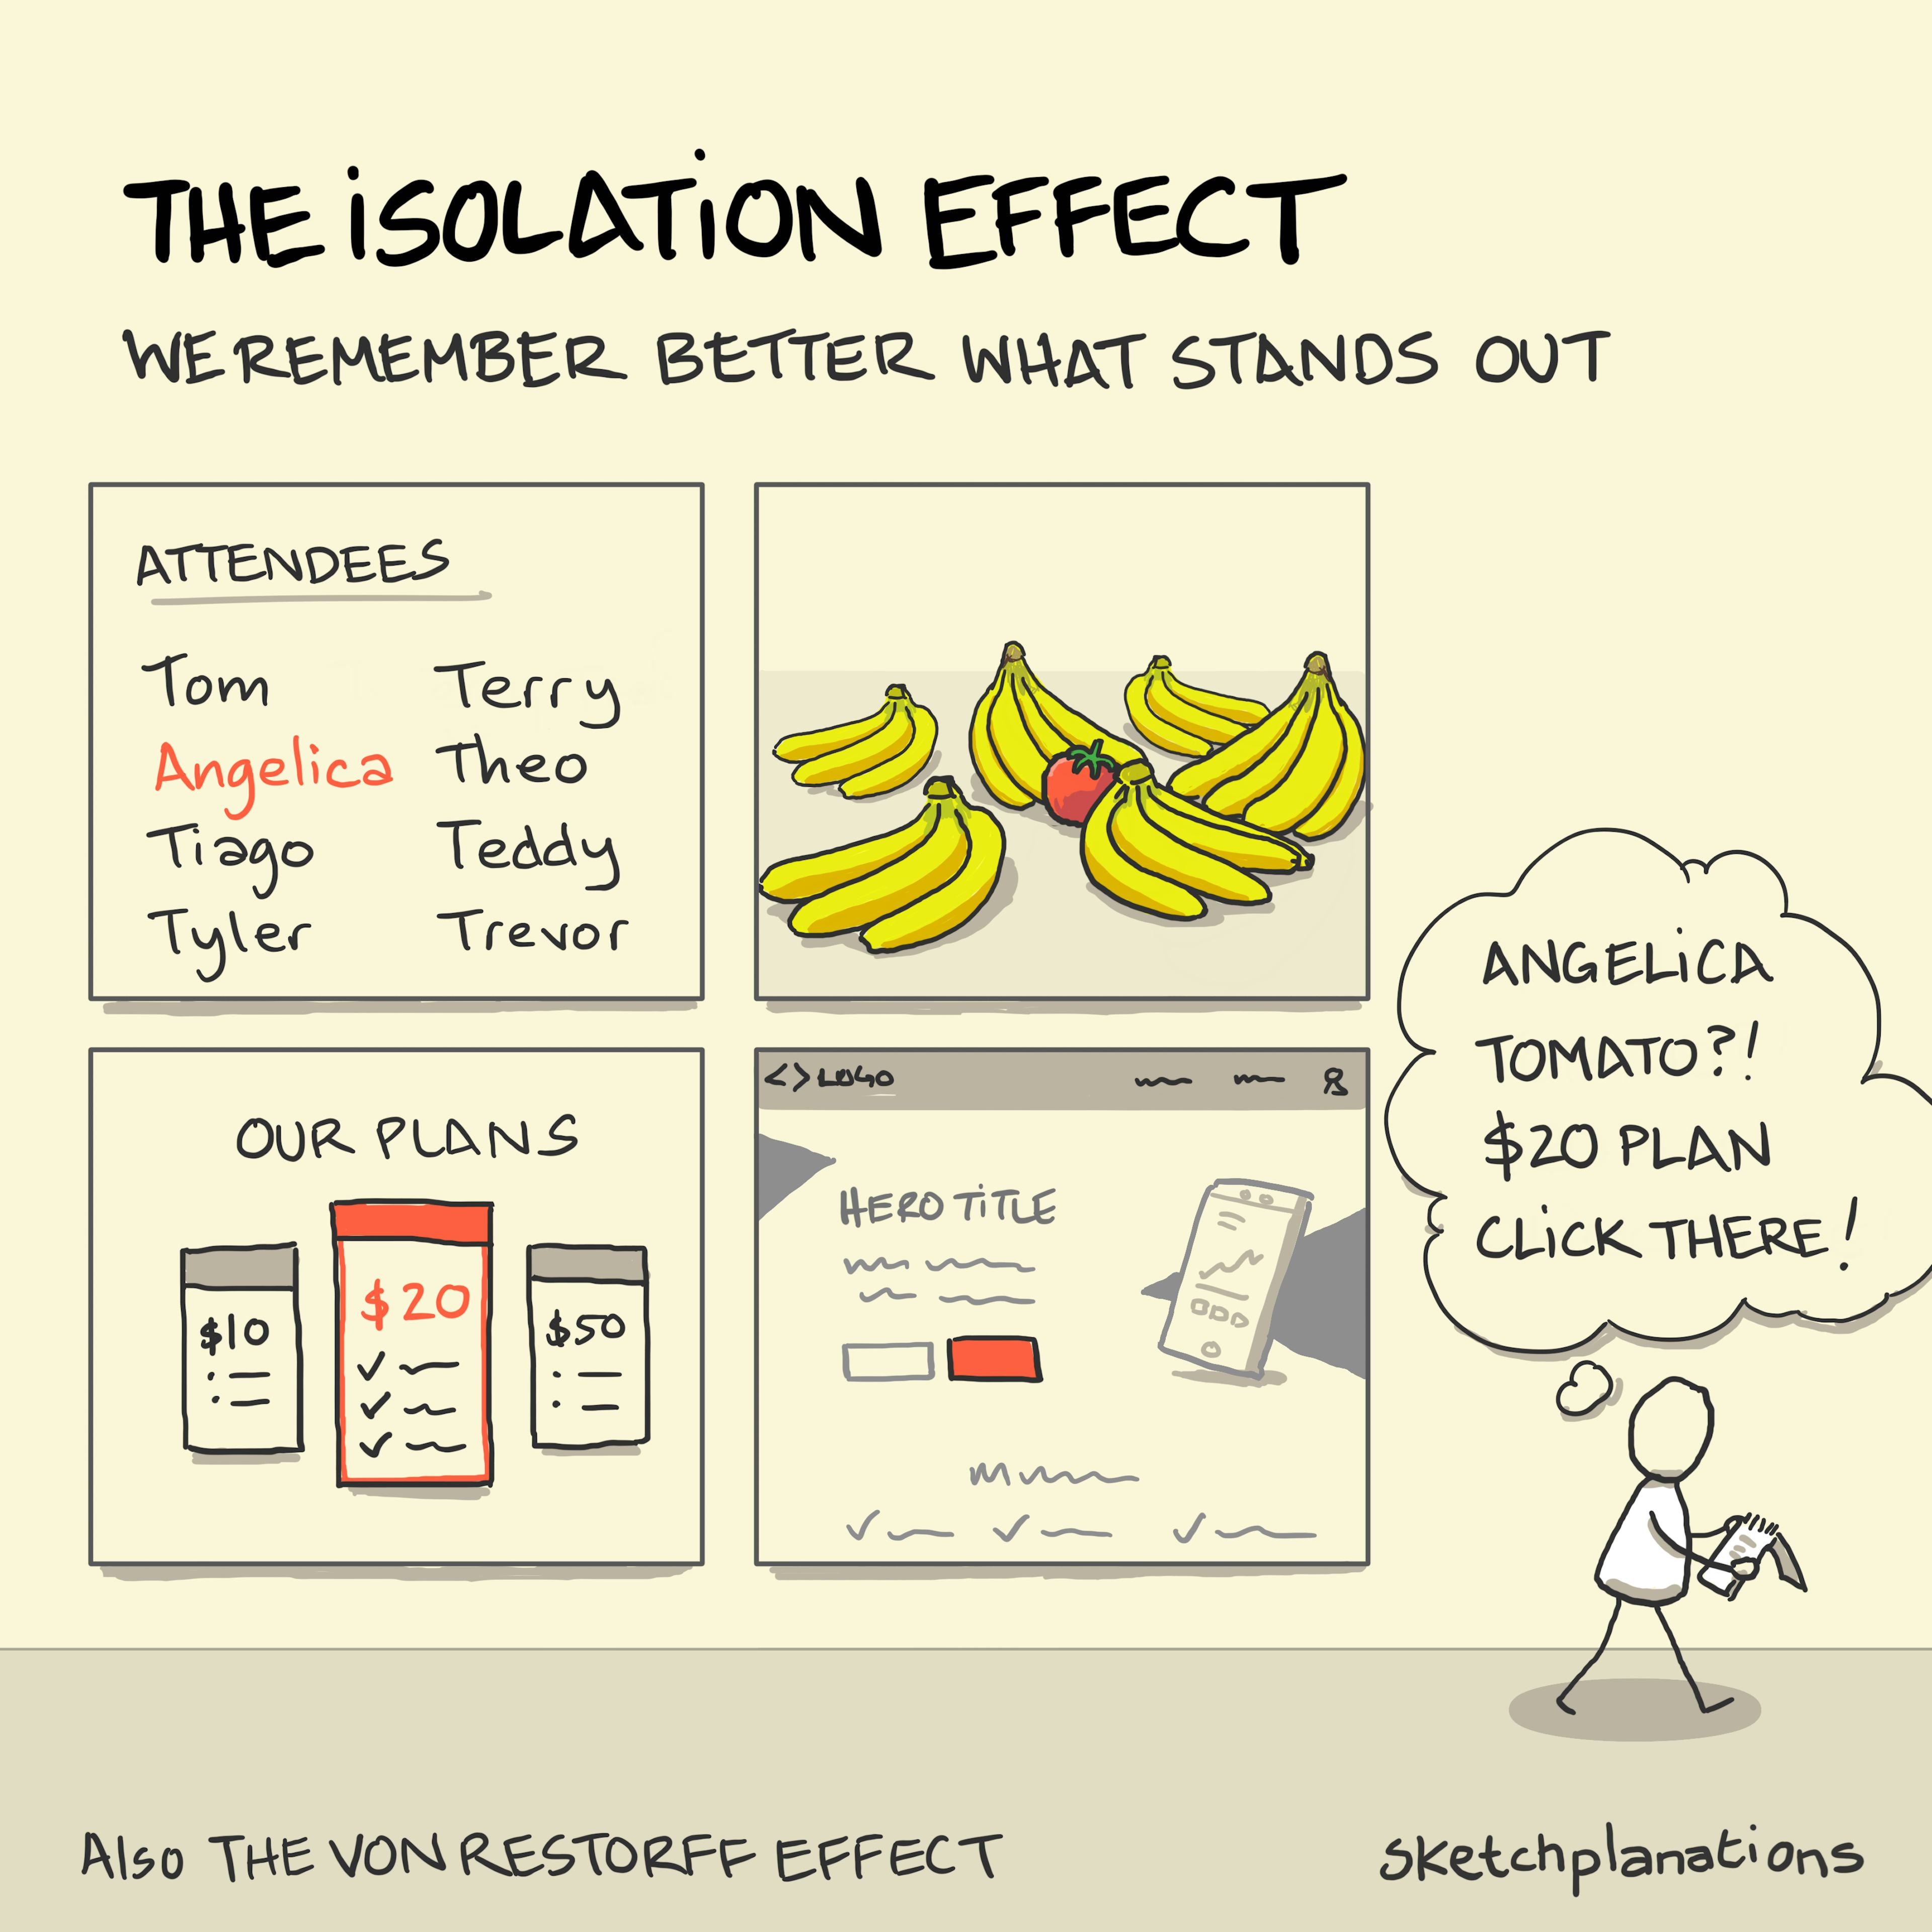 The isolation effect - Sketchplanations